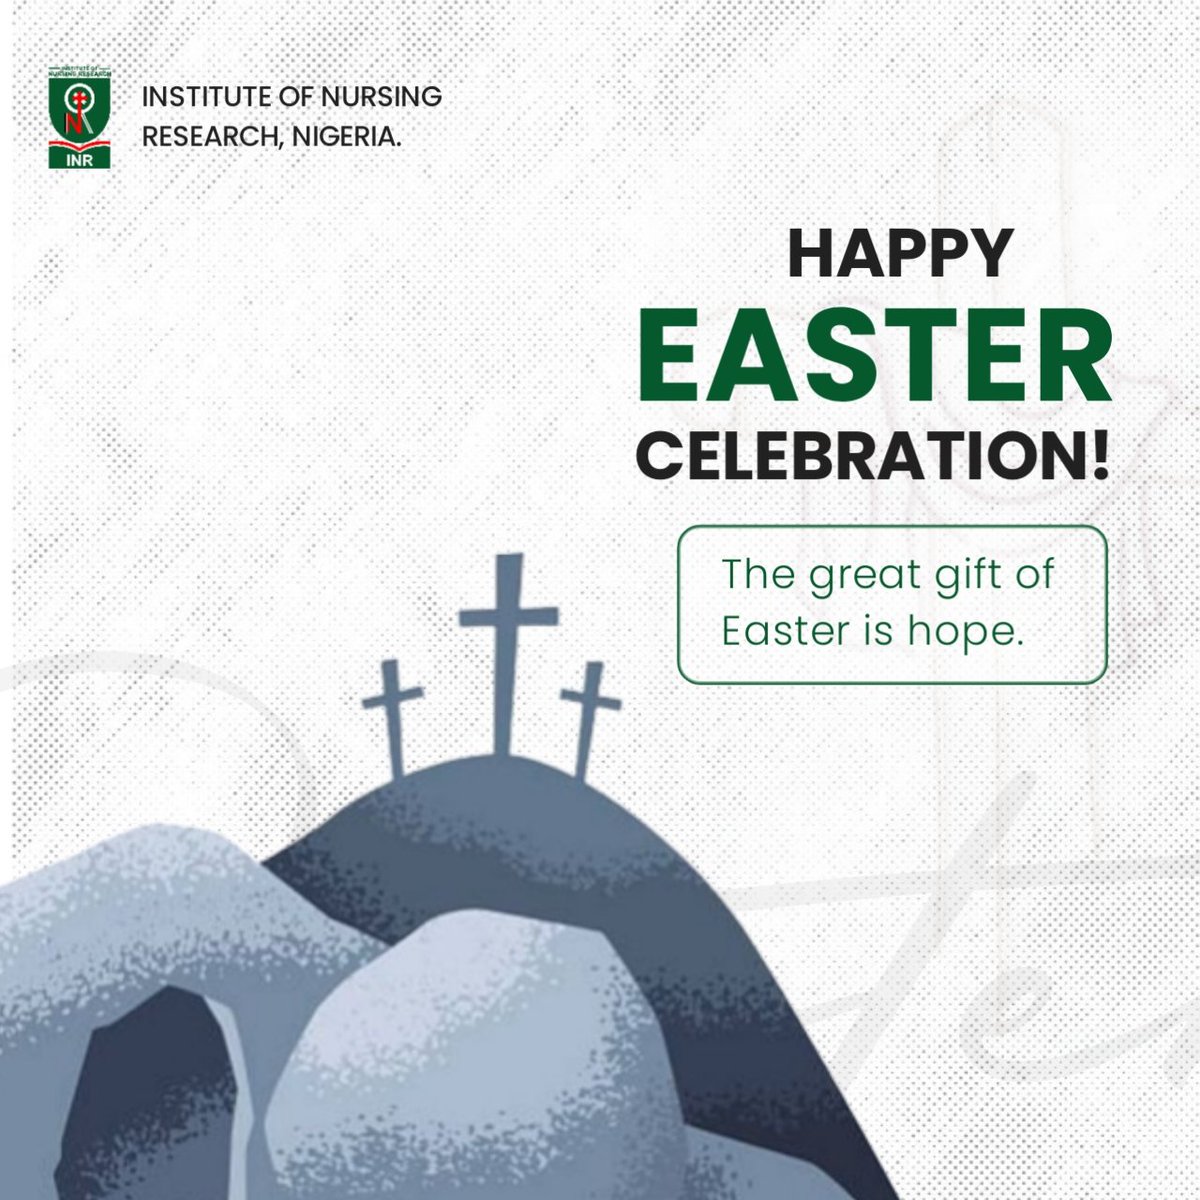 From INR Nigeria to you 🫵 May the hope and joy of this season be yours Happy Easter #inrn #easter #Research